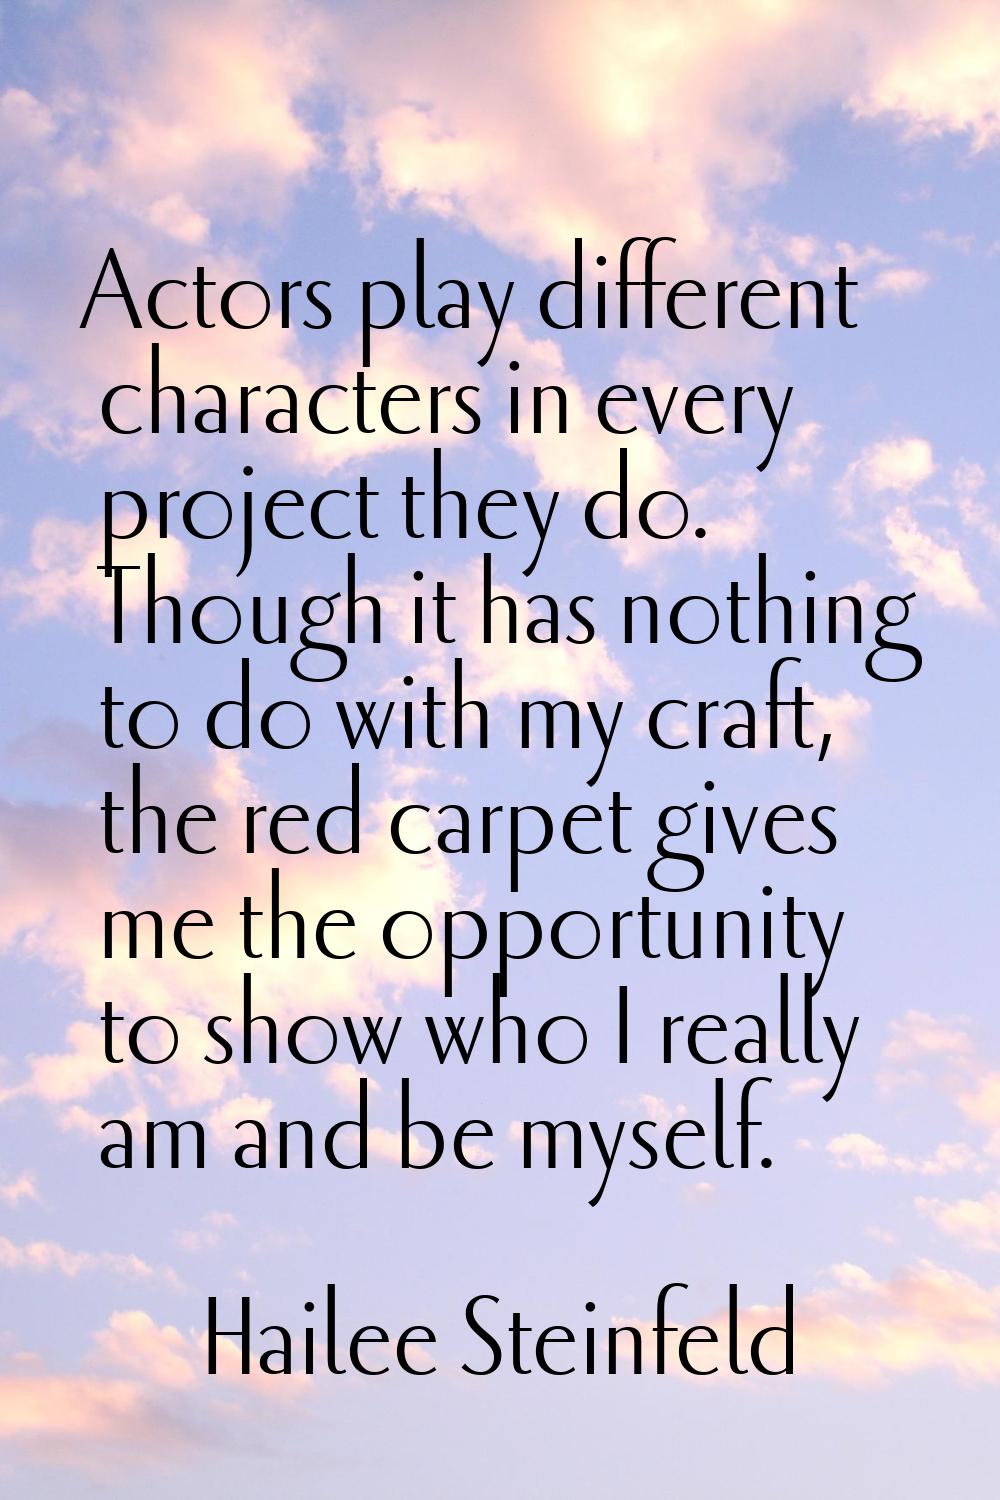 Actors play different characters in every project they do. Though it has nothing to do with my craf